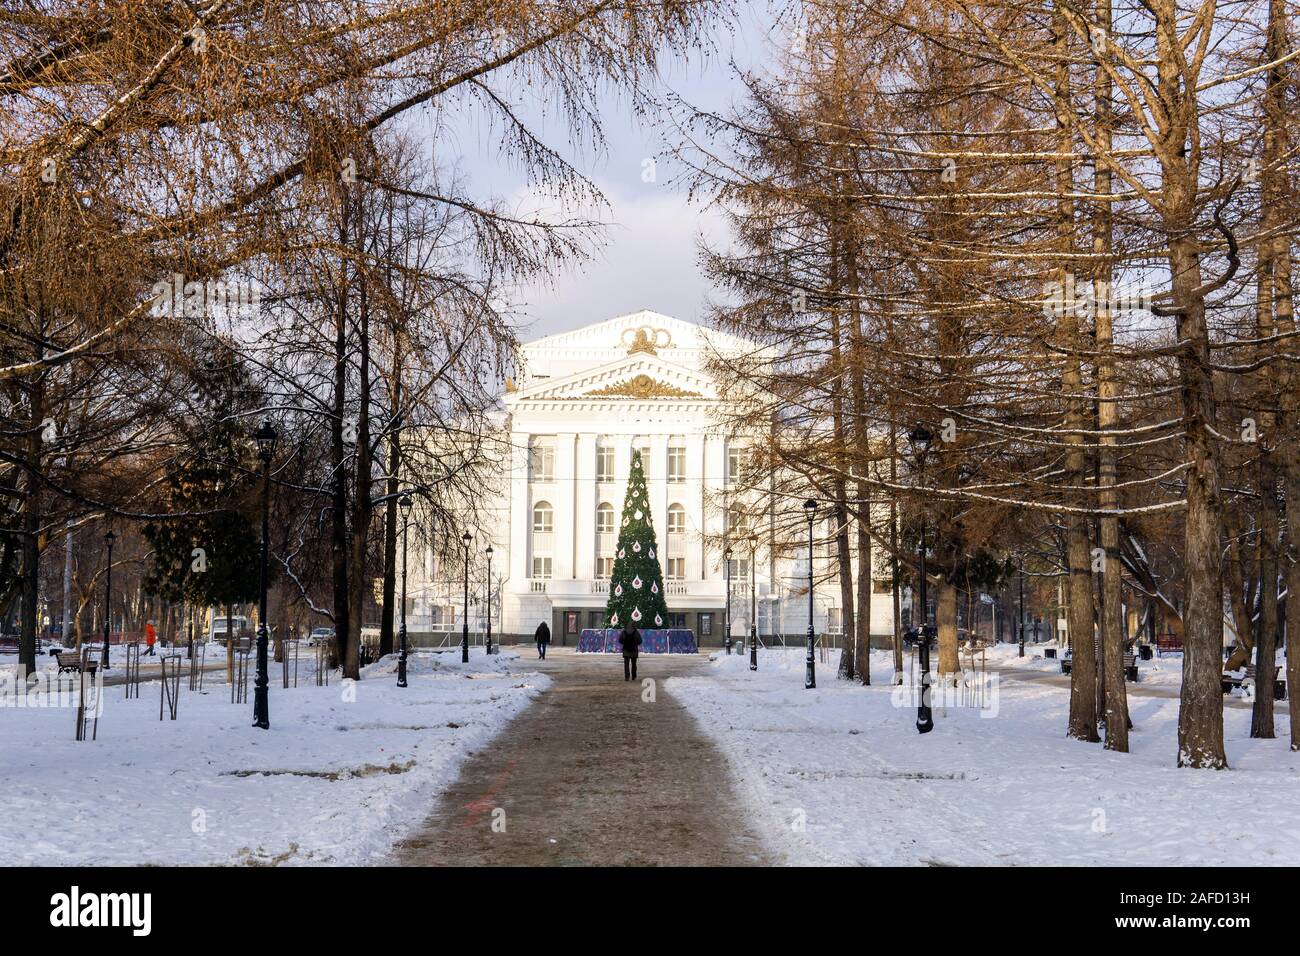 Perm, Russia - December 14, 2019: artificial Christmas tree in the park near the Opera House in the city center Stock Photo